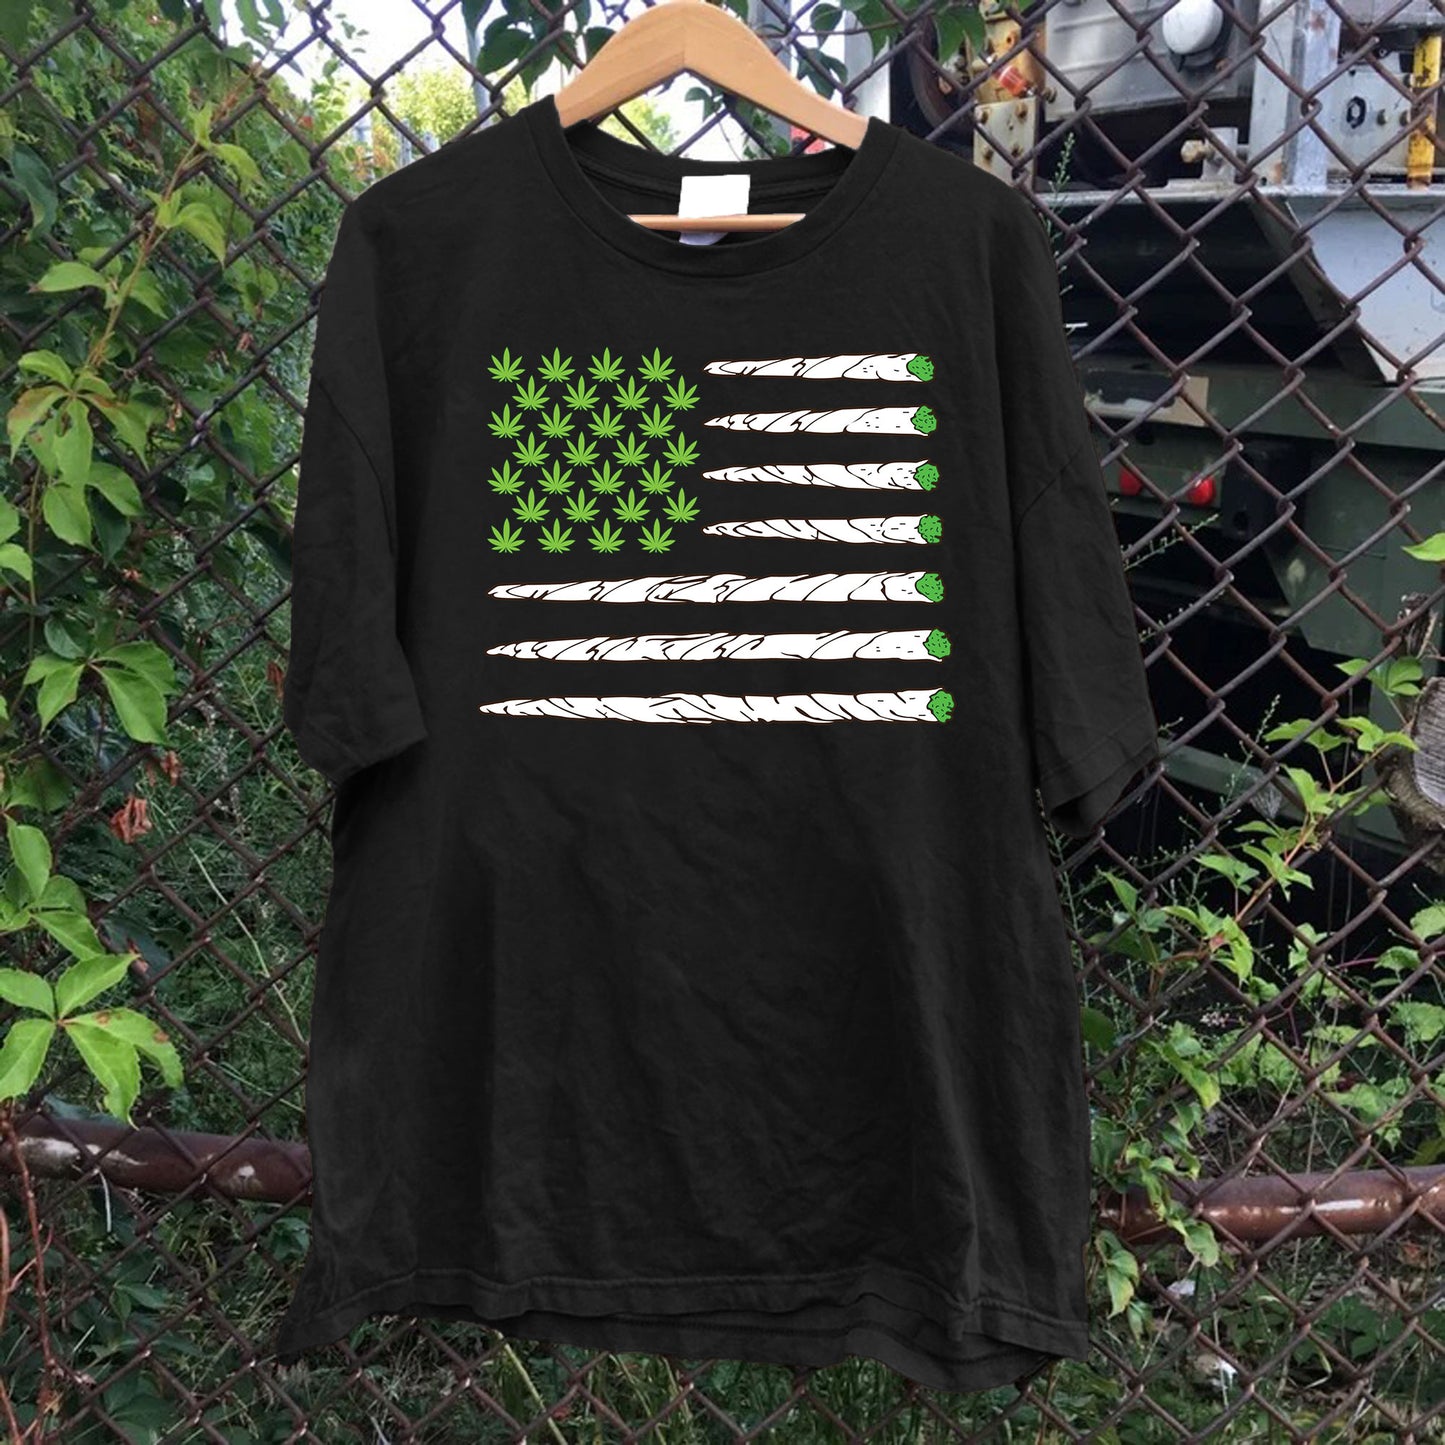 American Flag Joints Tee